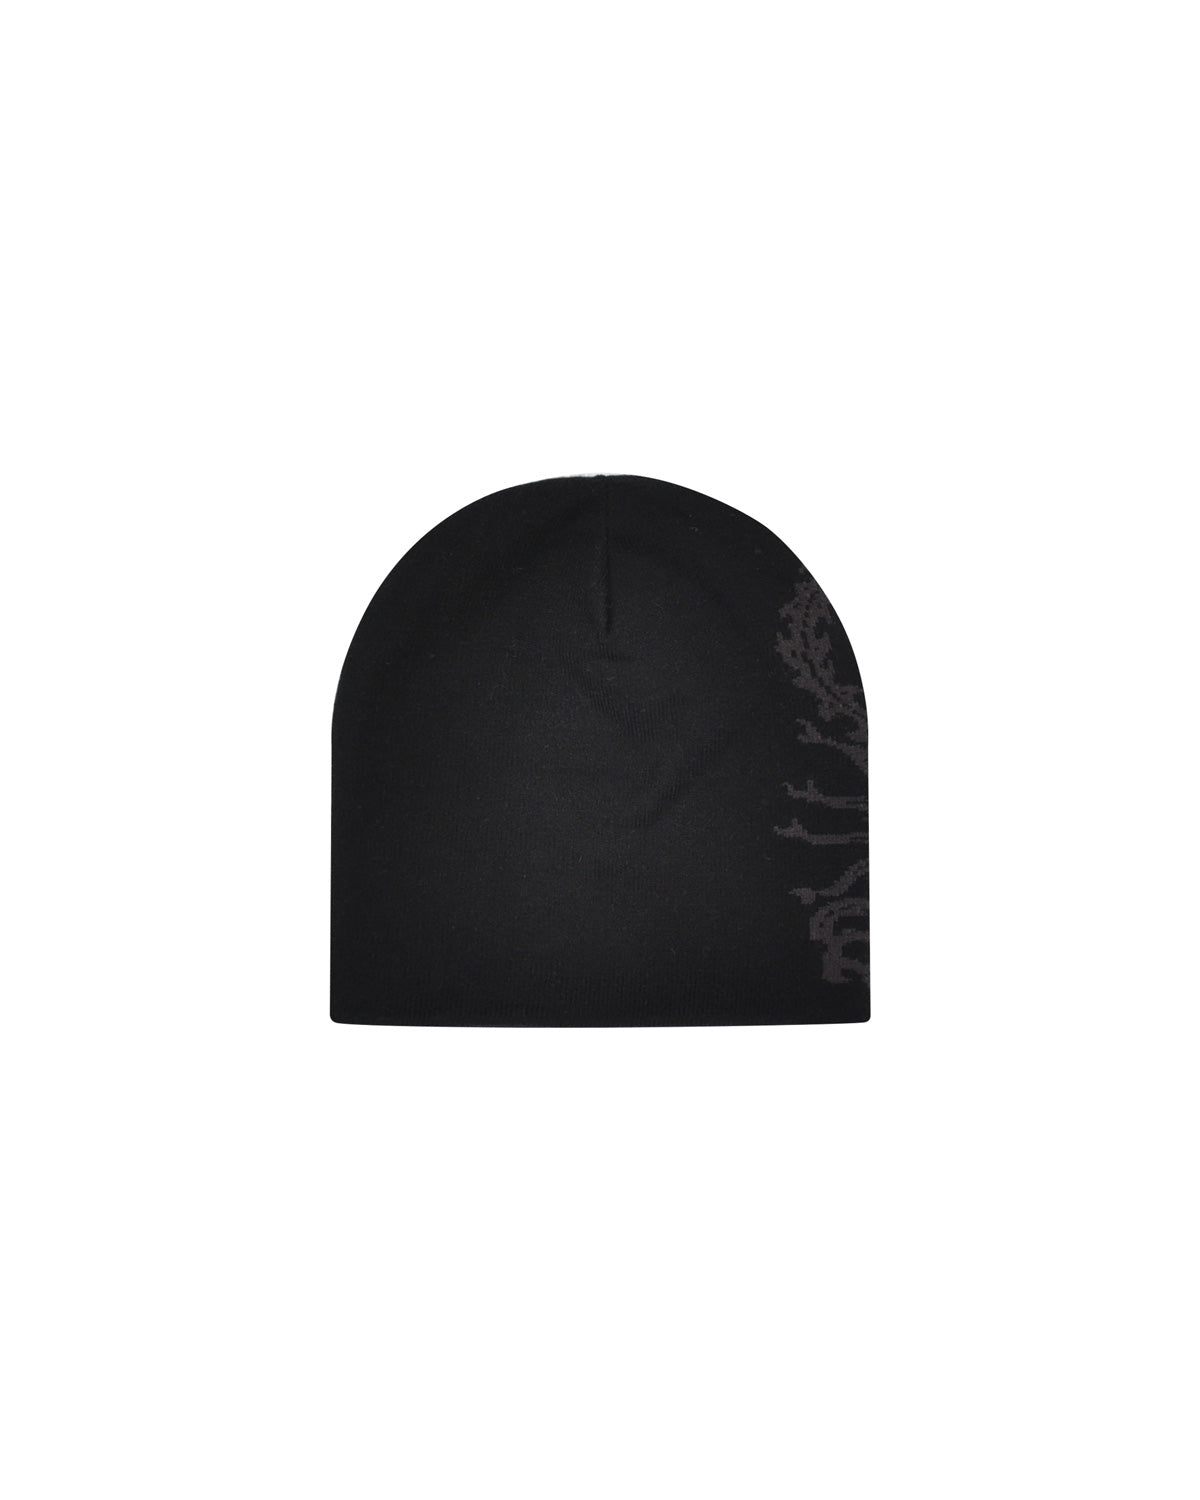 Doubleface Scorpion Black Knitted Beanie